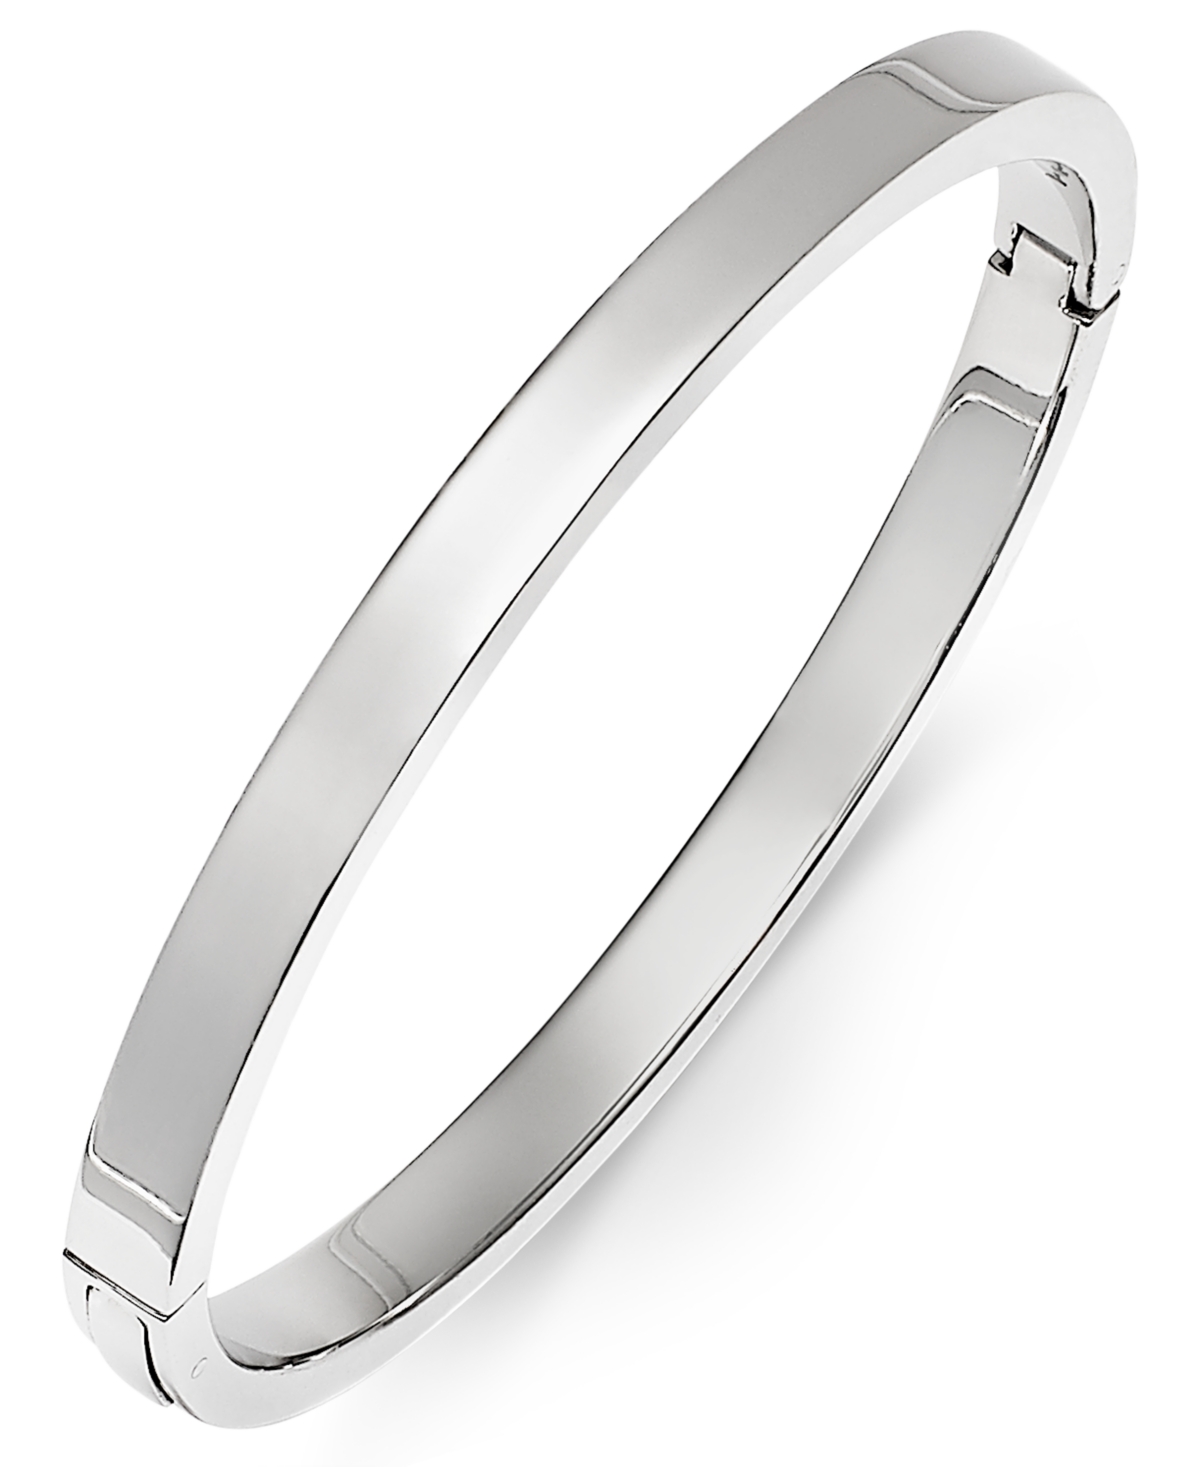 Polished Smooth Bangle Bracelet in Metallic Yellow Ion-Plated Stainless Steel, Rose Ion-Plated Stainless Steel, or Stainless Steel